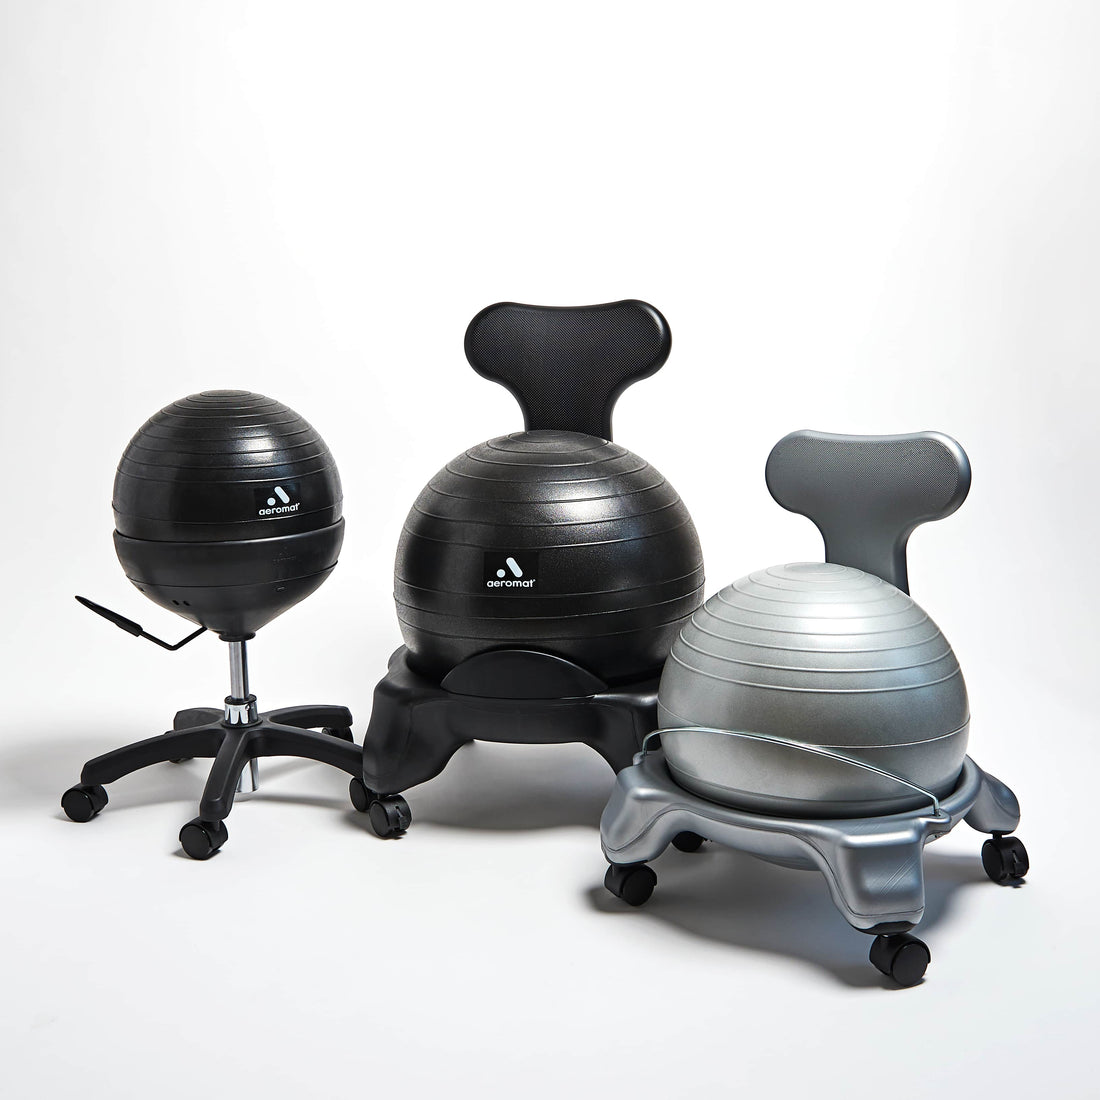 Ball Chairs - Aeromat/Ecowise